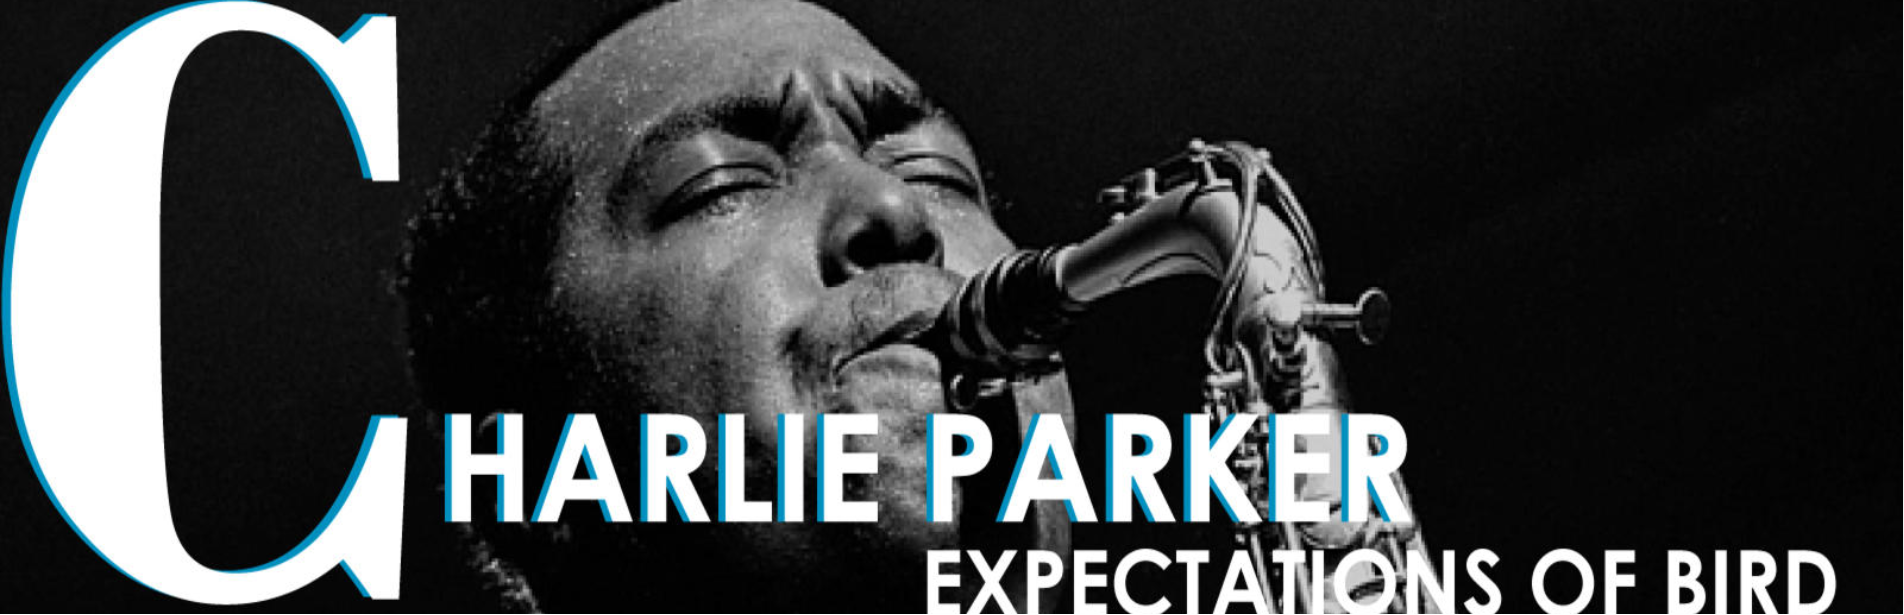 Charlie Parker: Expectations of Bird